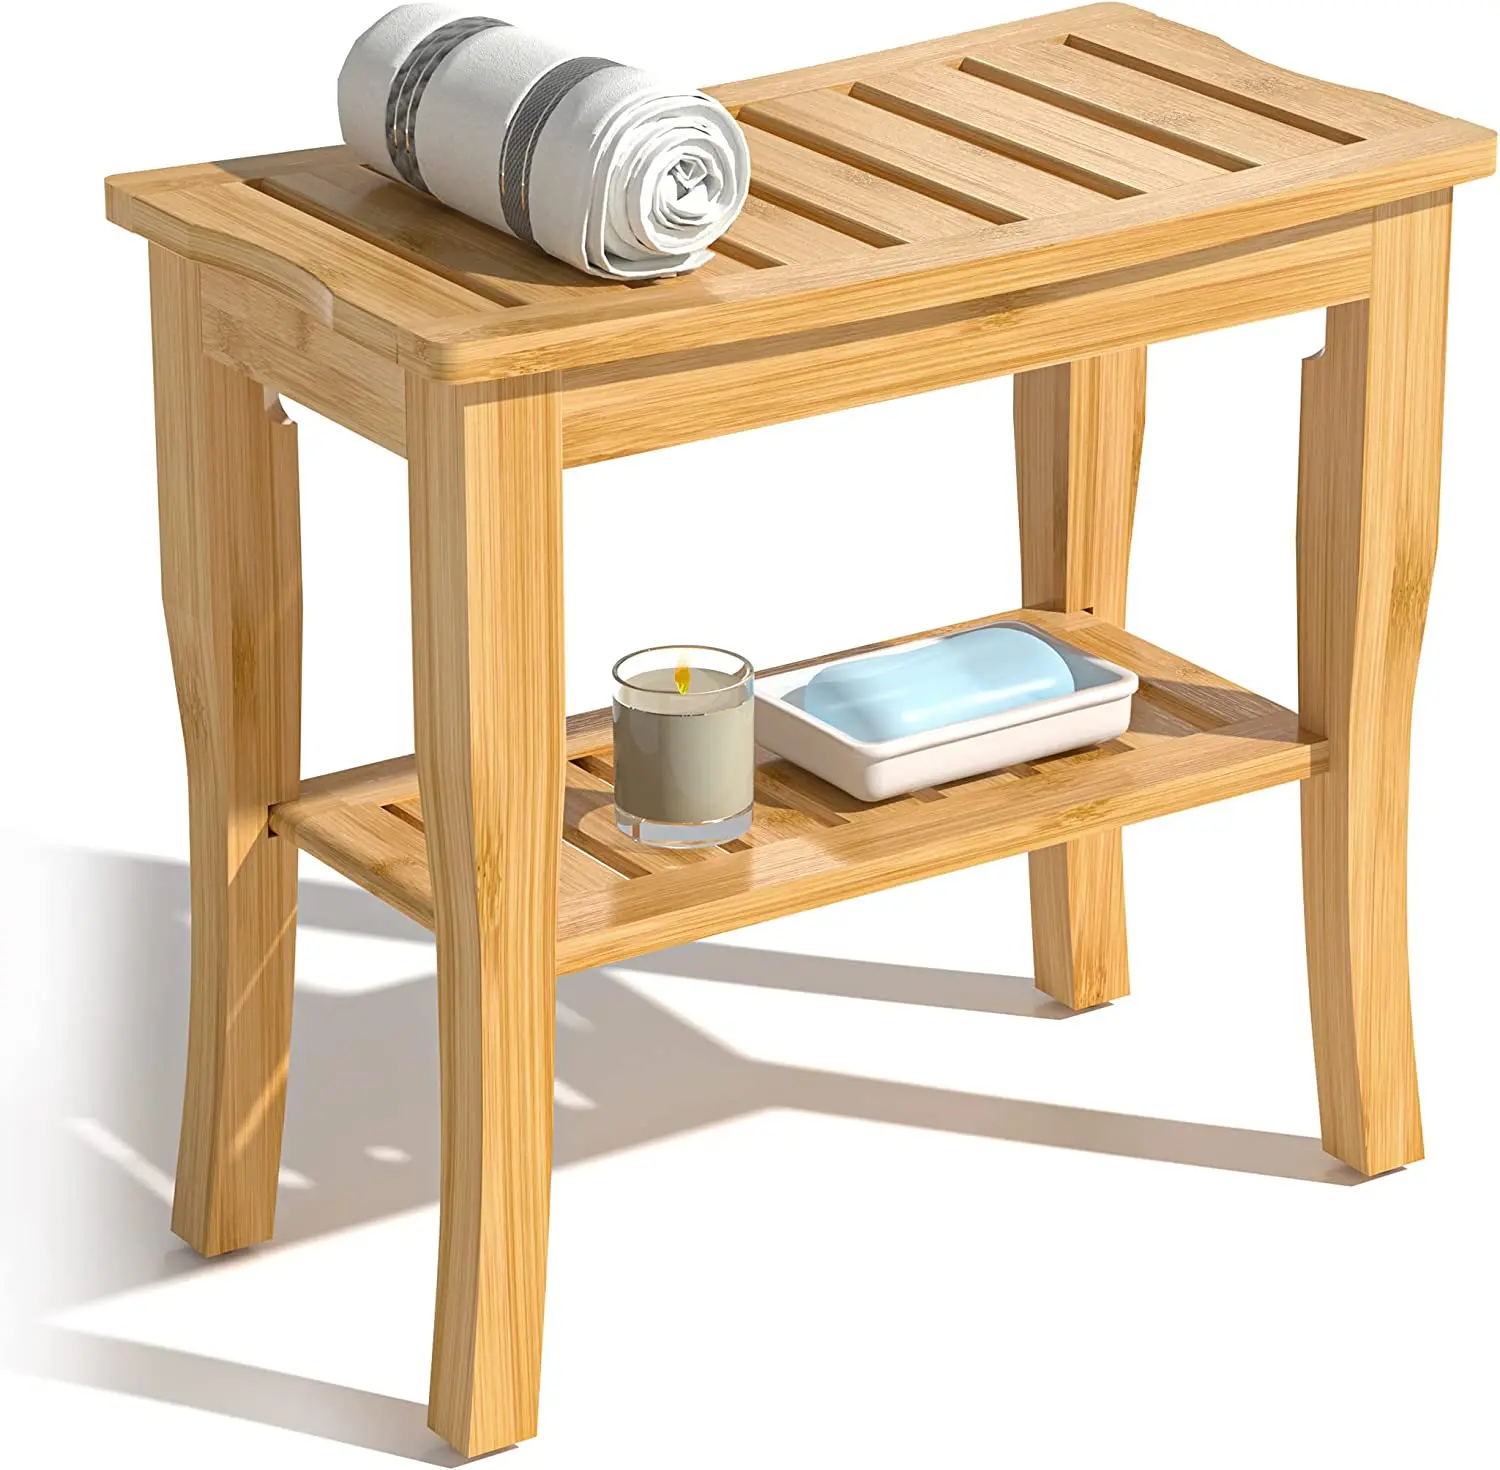 Bamboo Shower Bench Wood Shower Bench with Storage Shelf for Inside Shower (60689107620)